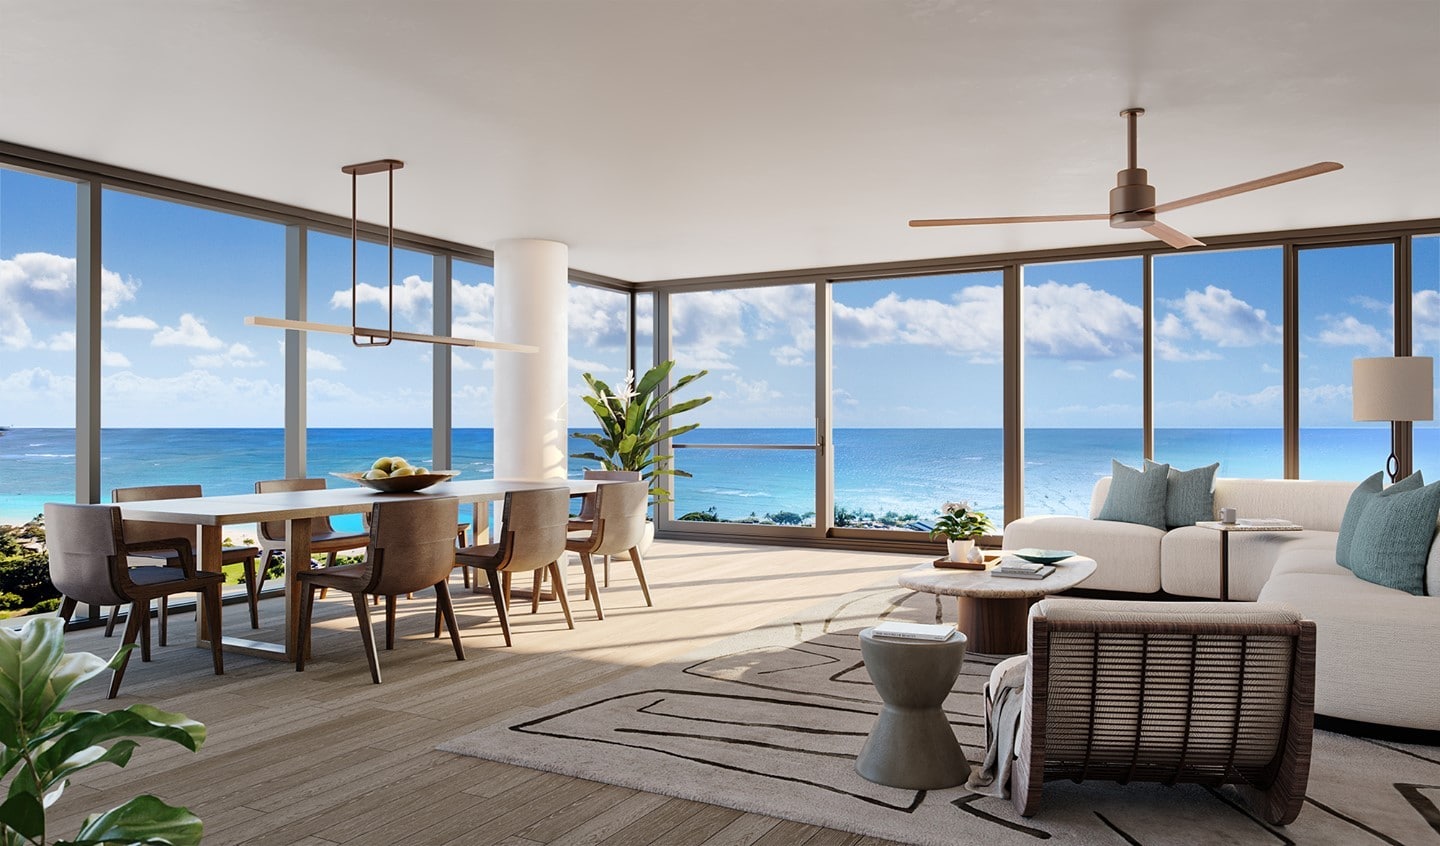 At The Park Ward Village, floor-to-ceiling windows let the beauty of the island into your home. Here, the relationship between the building and the environment has been carefully designed, embracing and creating harmony between interior spaces and outdoor scenes.